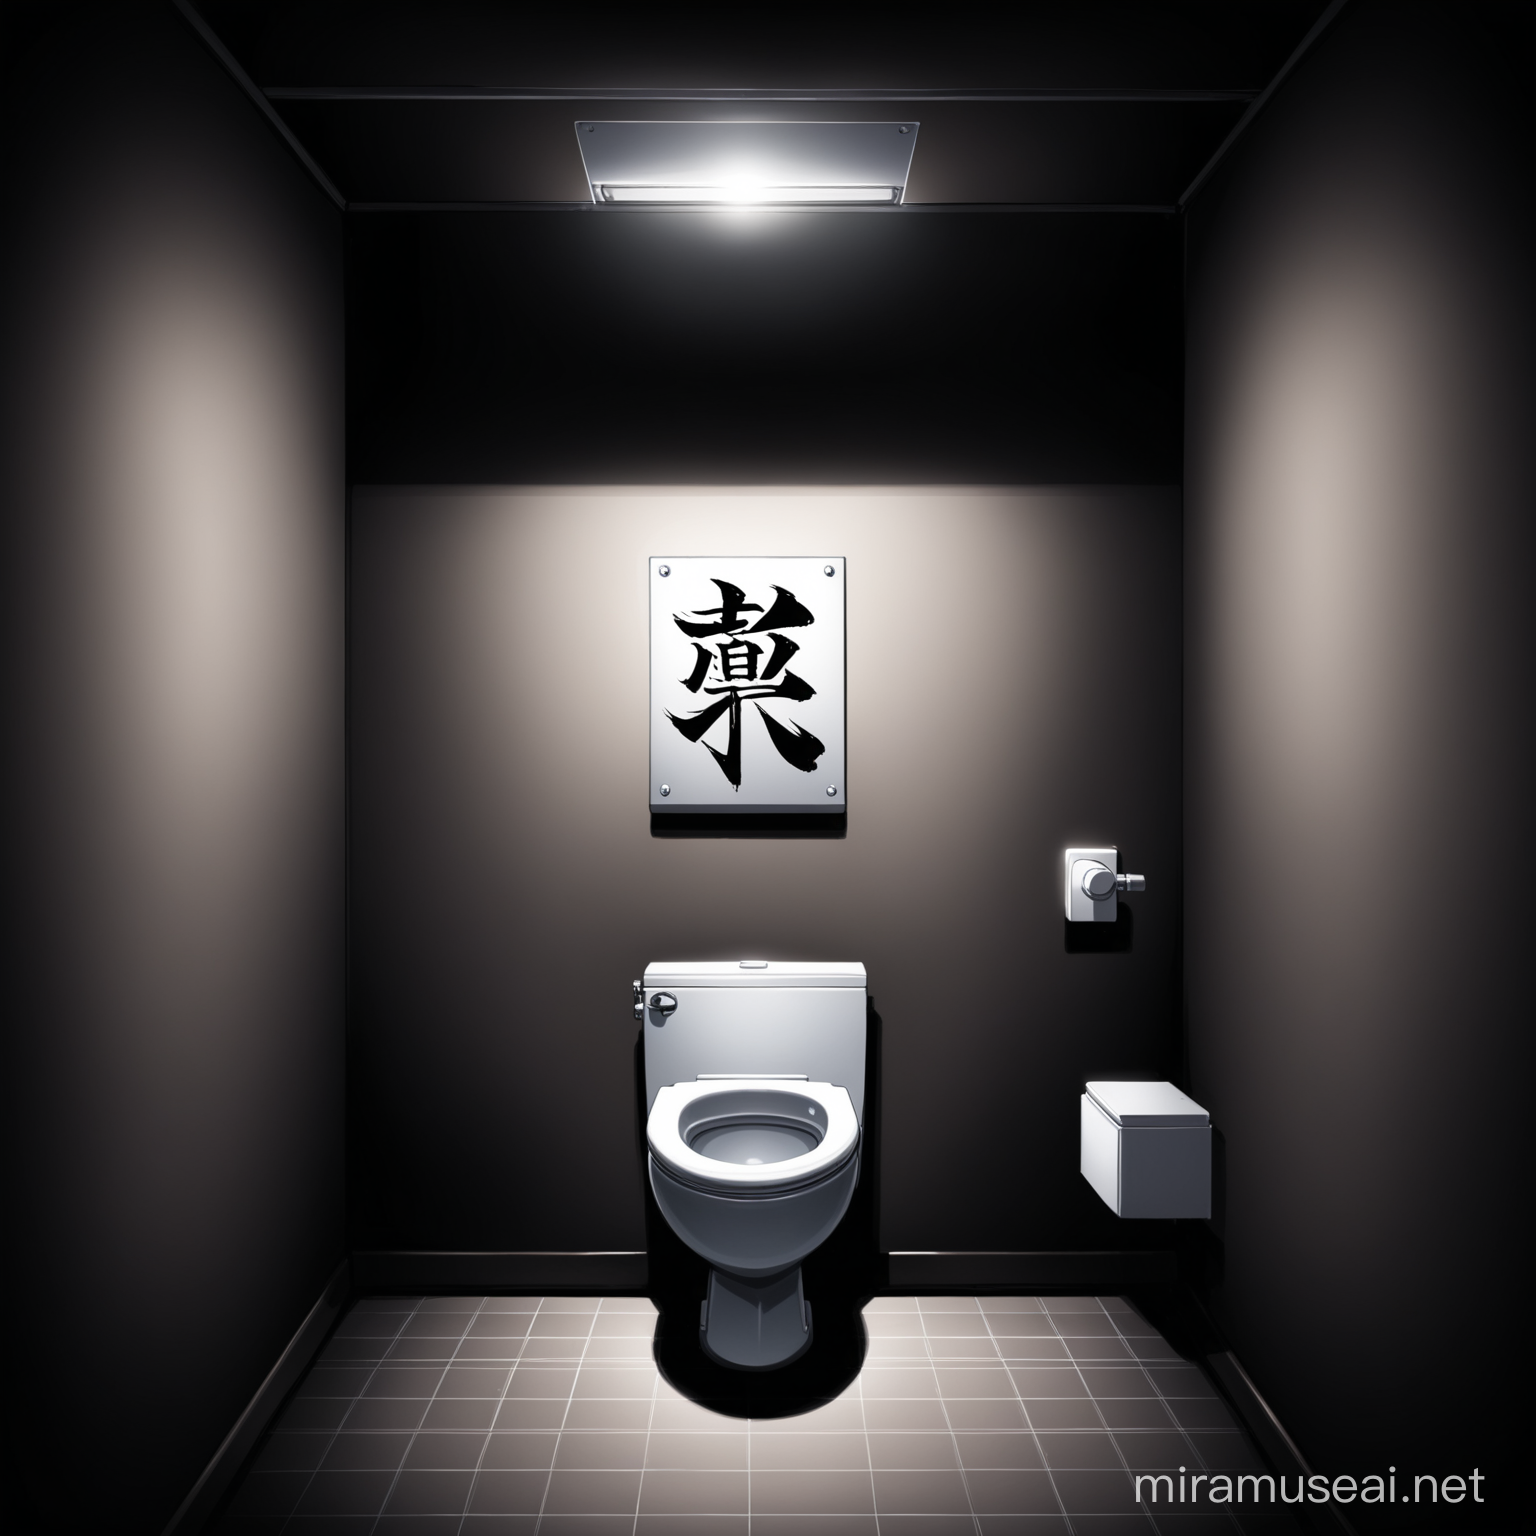 High School Girl in Dimly Lit Private Restroom with Kanji Writing